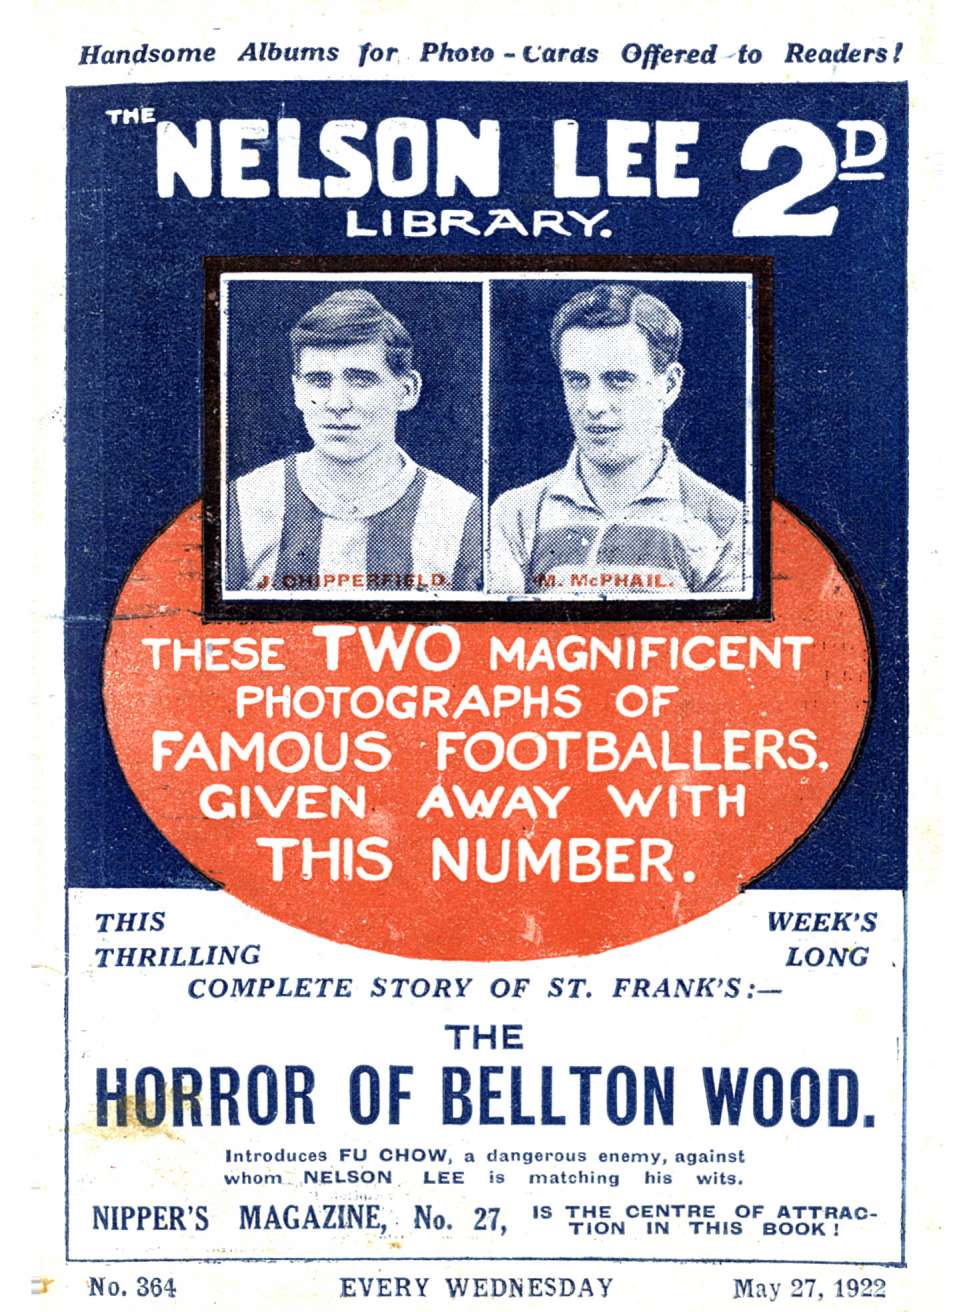 Book Cover For Nelson Lee Library s1 364 - The Horror of Bellton Wood